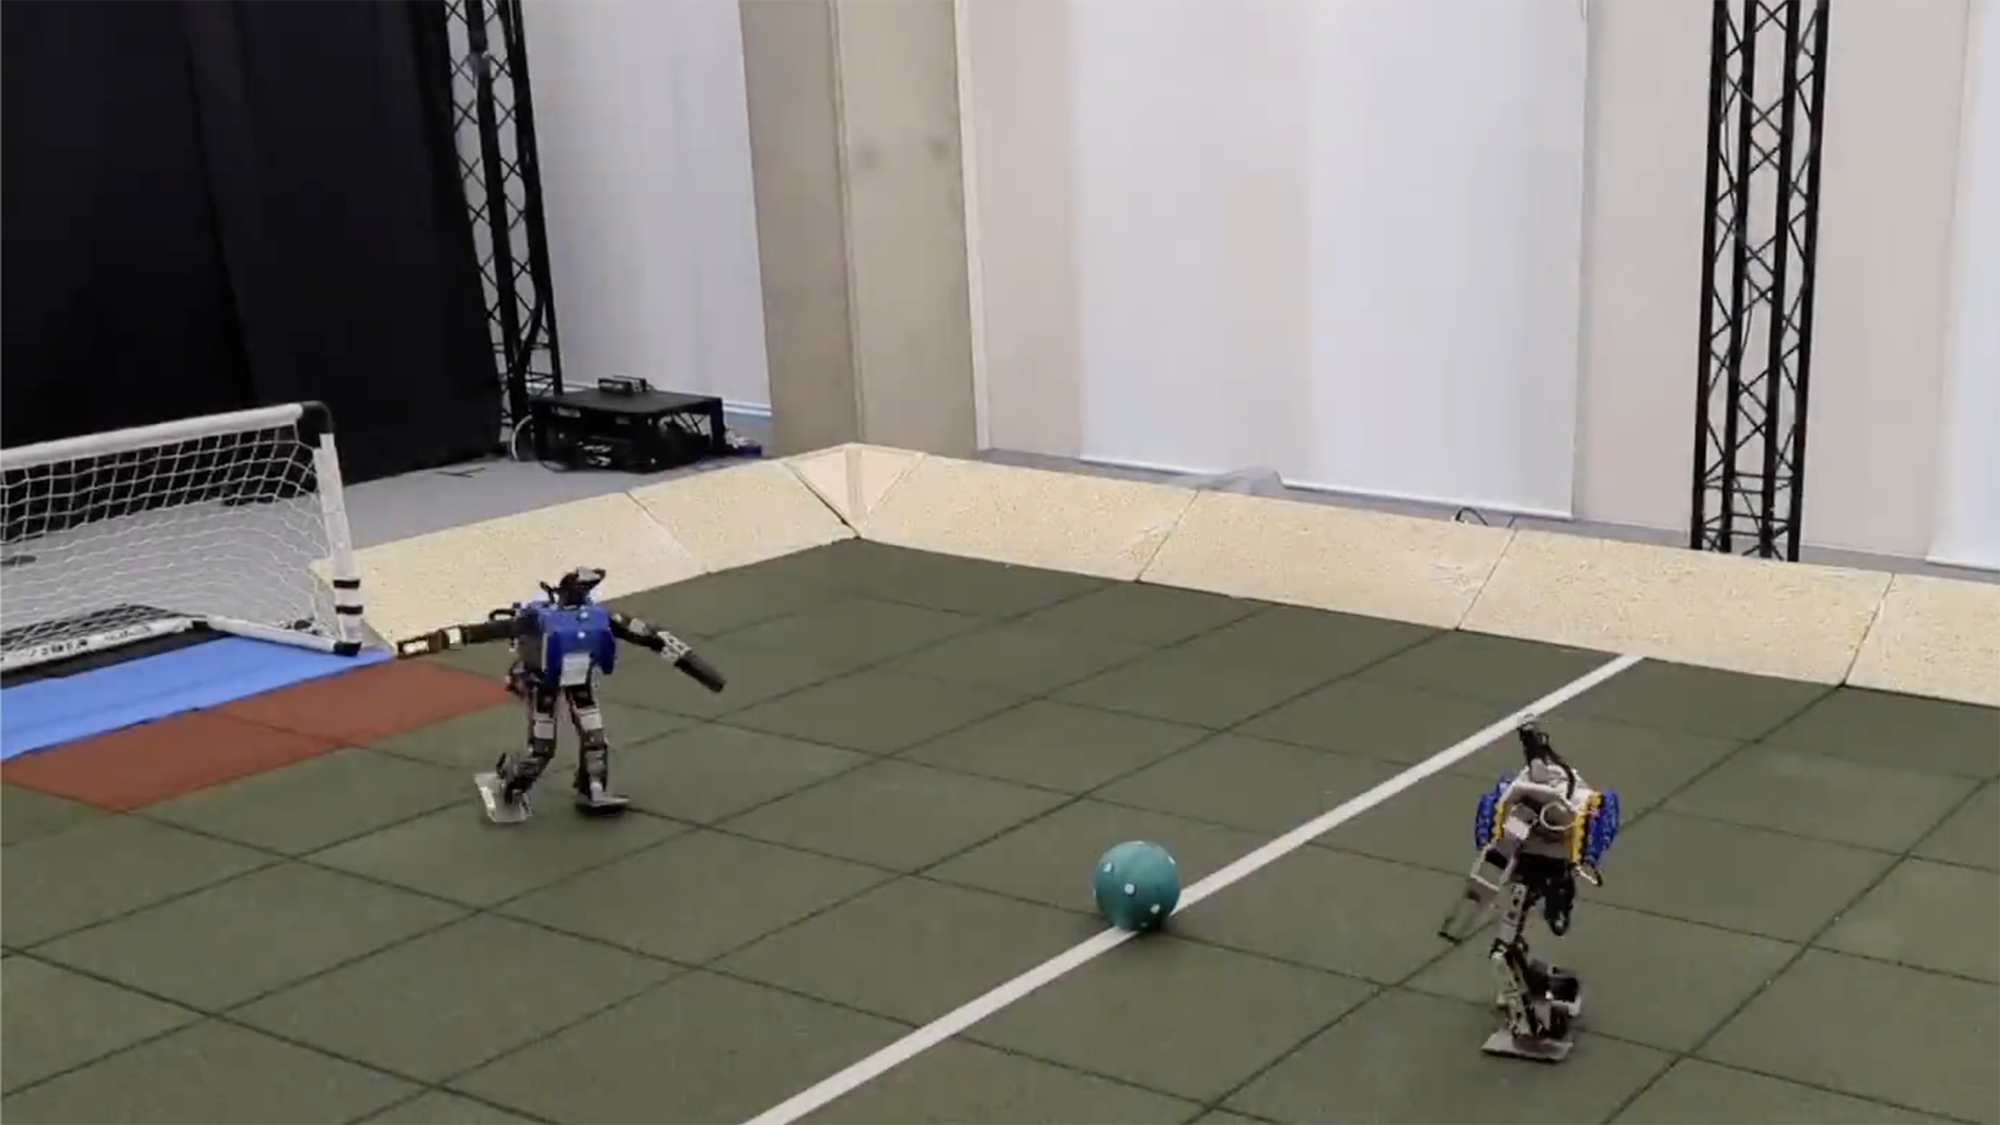 Two robots playing soccer